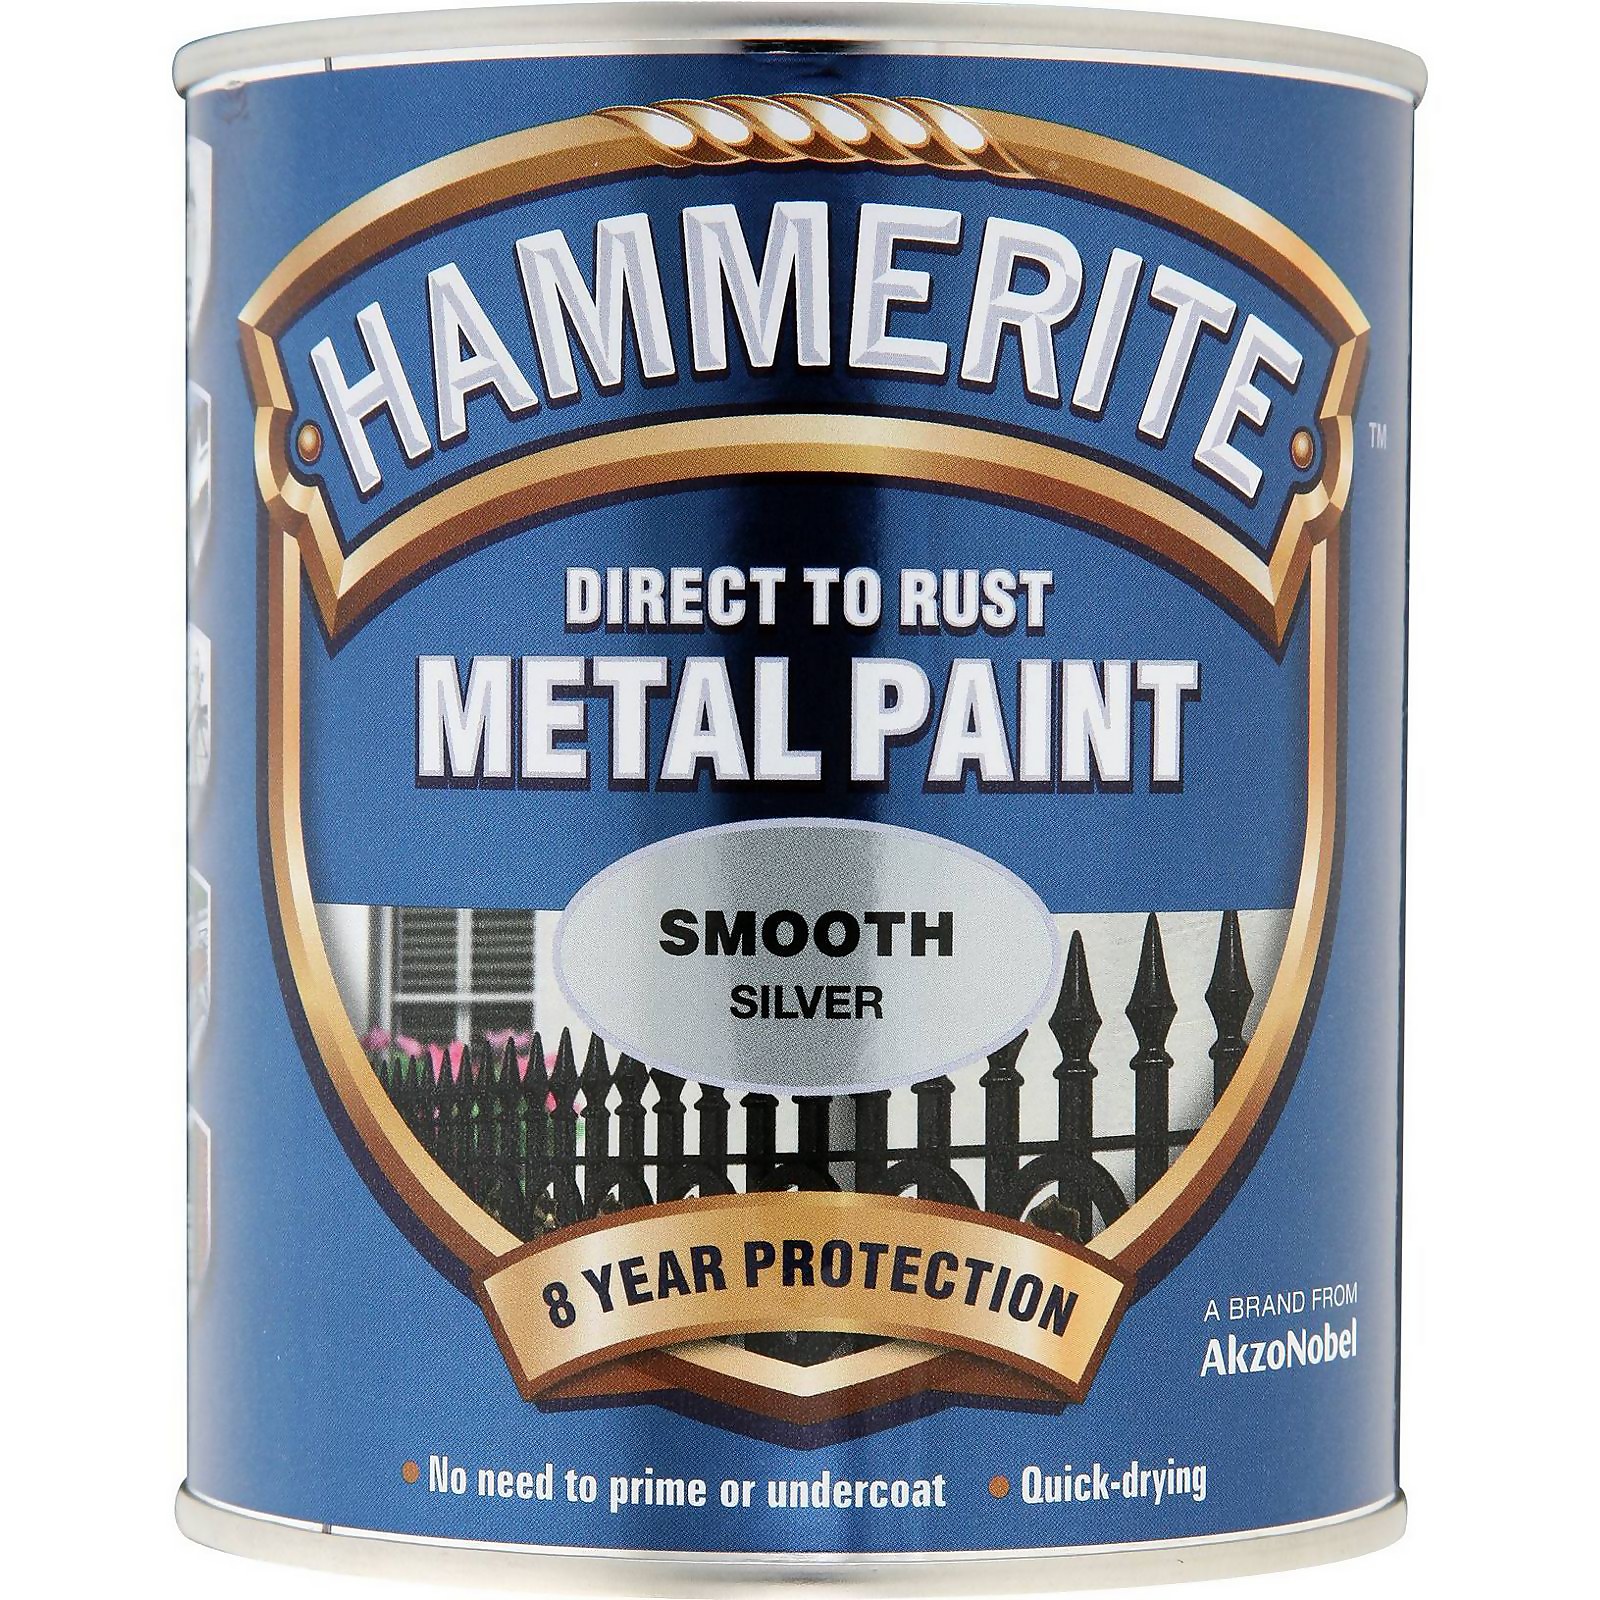 Hammerite Direct to Rust Metal Paint Smooth Silver - 250ml